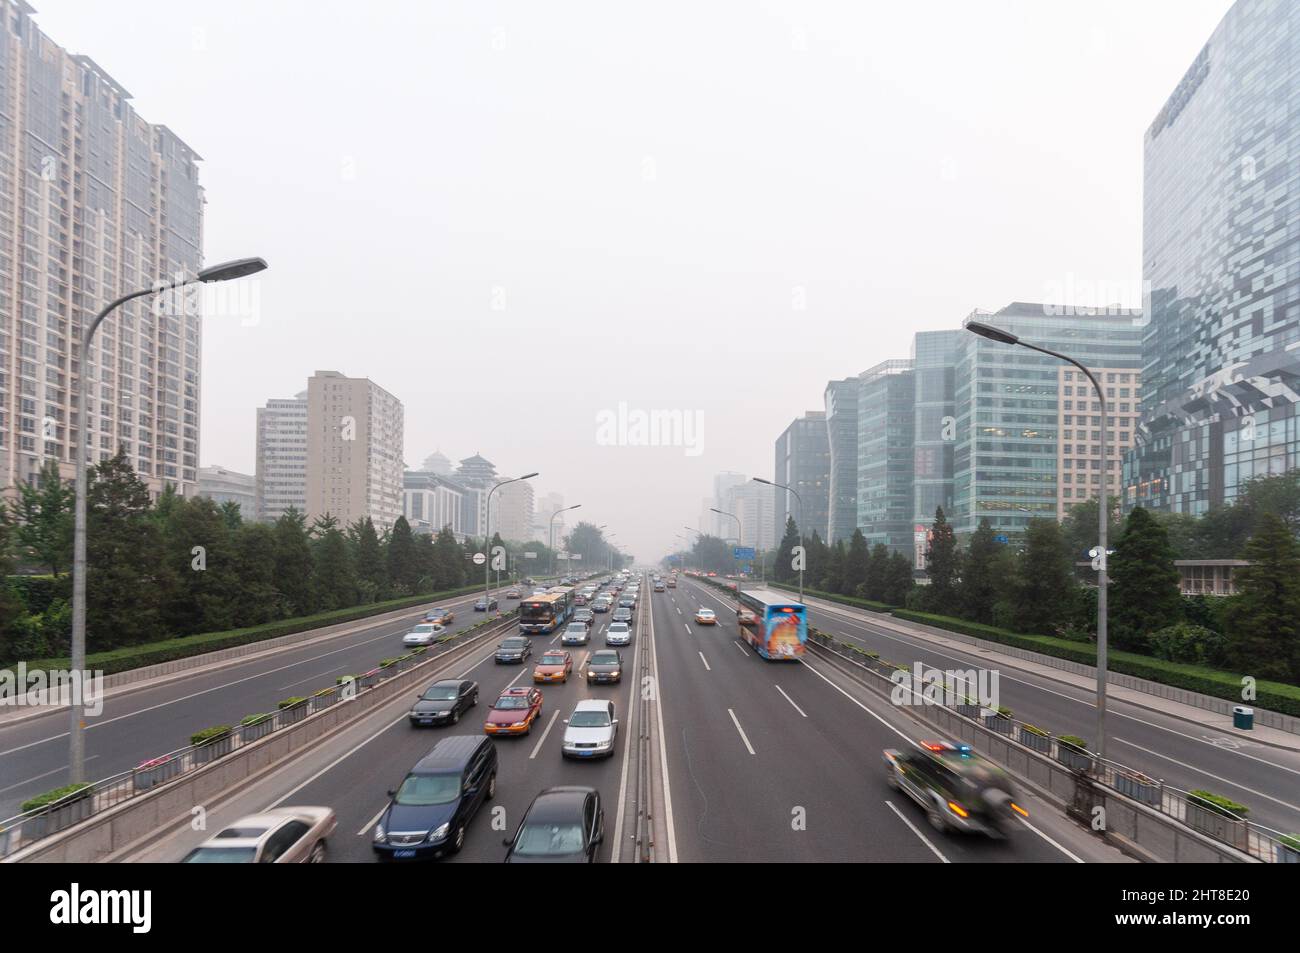 Beijing, China - August 9, 2010: Air pollution shrouds moden office buildings that line Beijing's Second Ring Road. Stock Photo